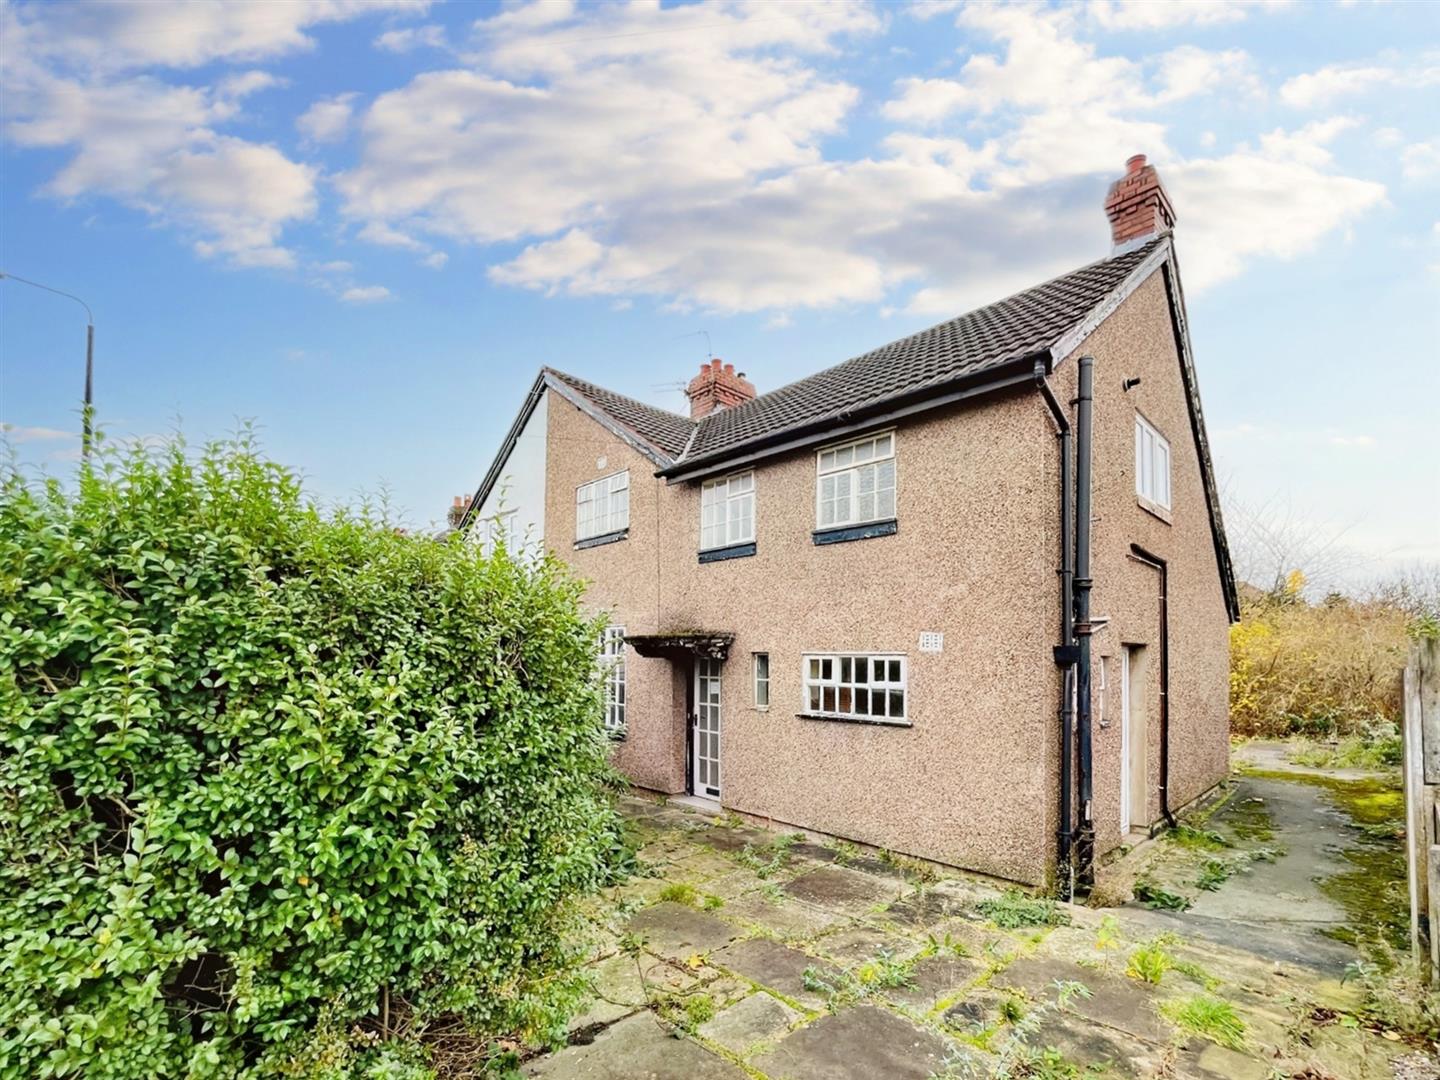 3 bed semi-detached house for sale in Acacia Avenue, Altrincham - Property Image 1